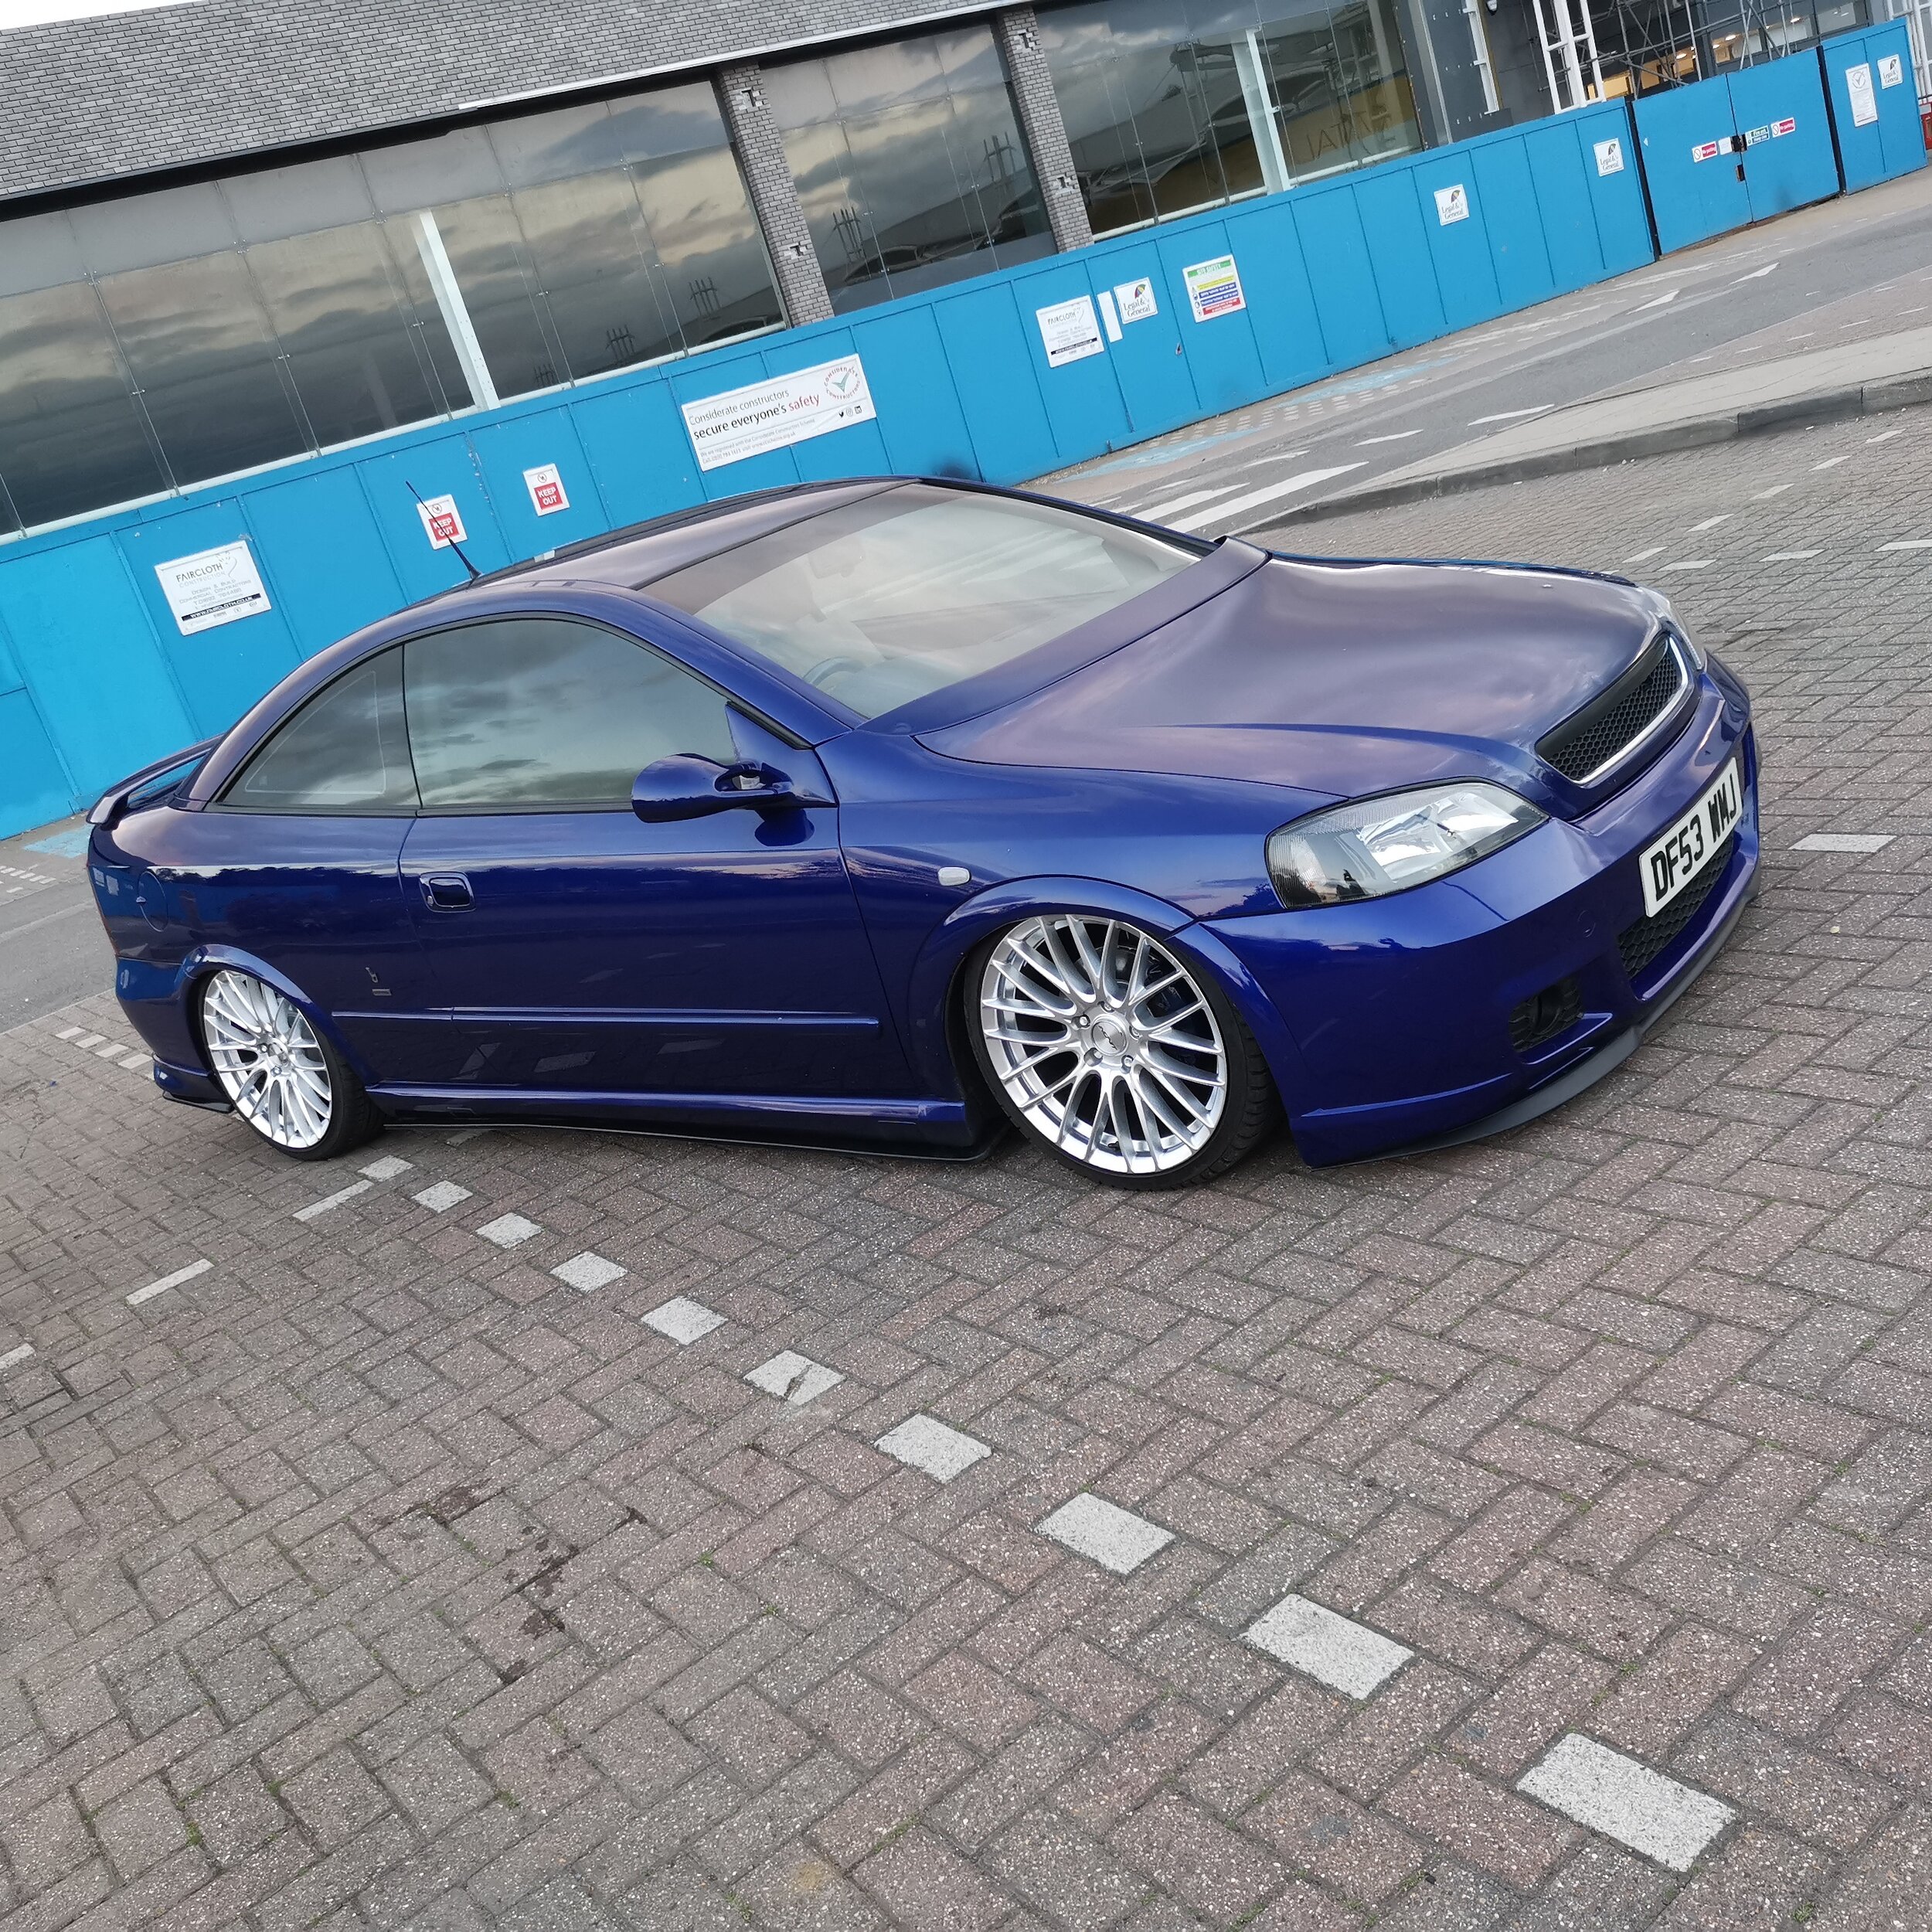 Blue modified Vauxhall Astra 100 edition offside front parked in a carpark.jpg